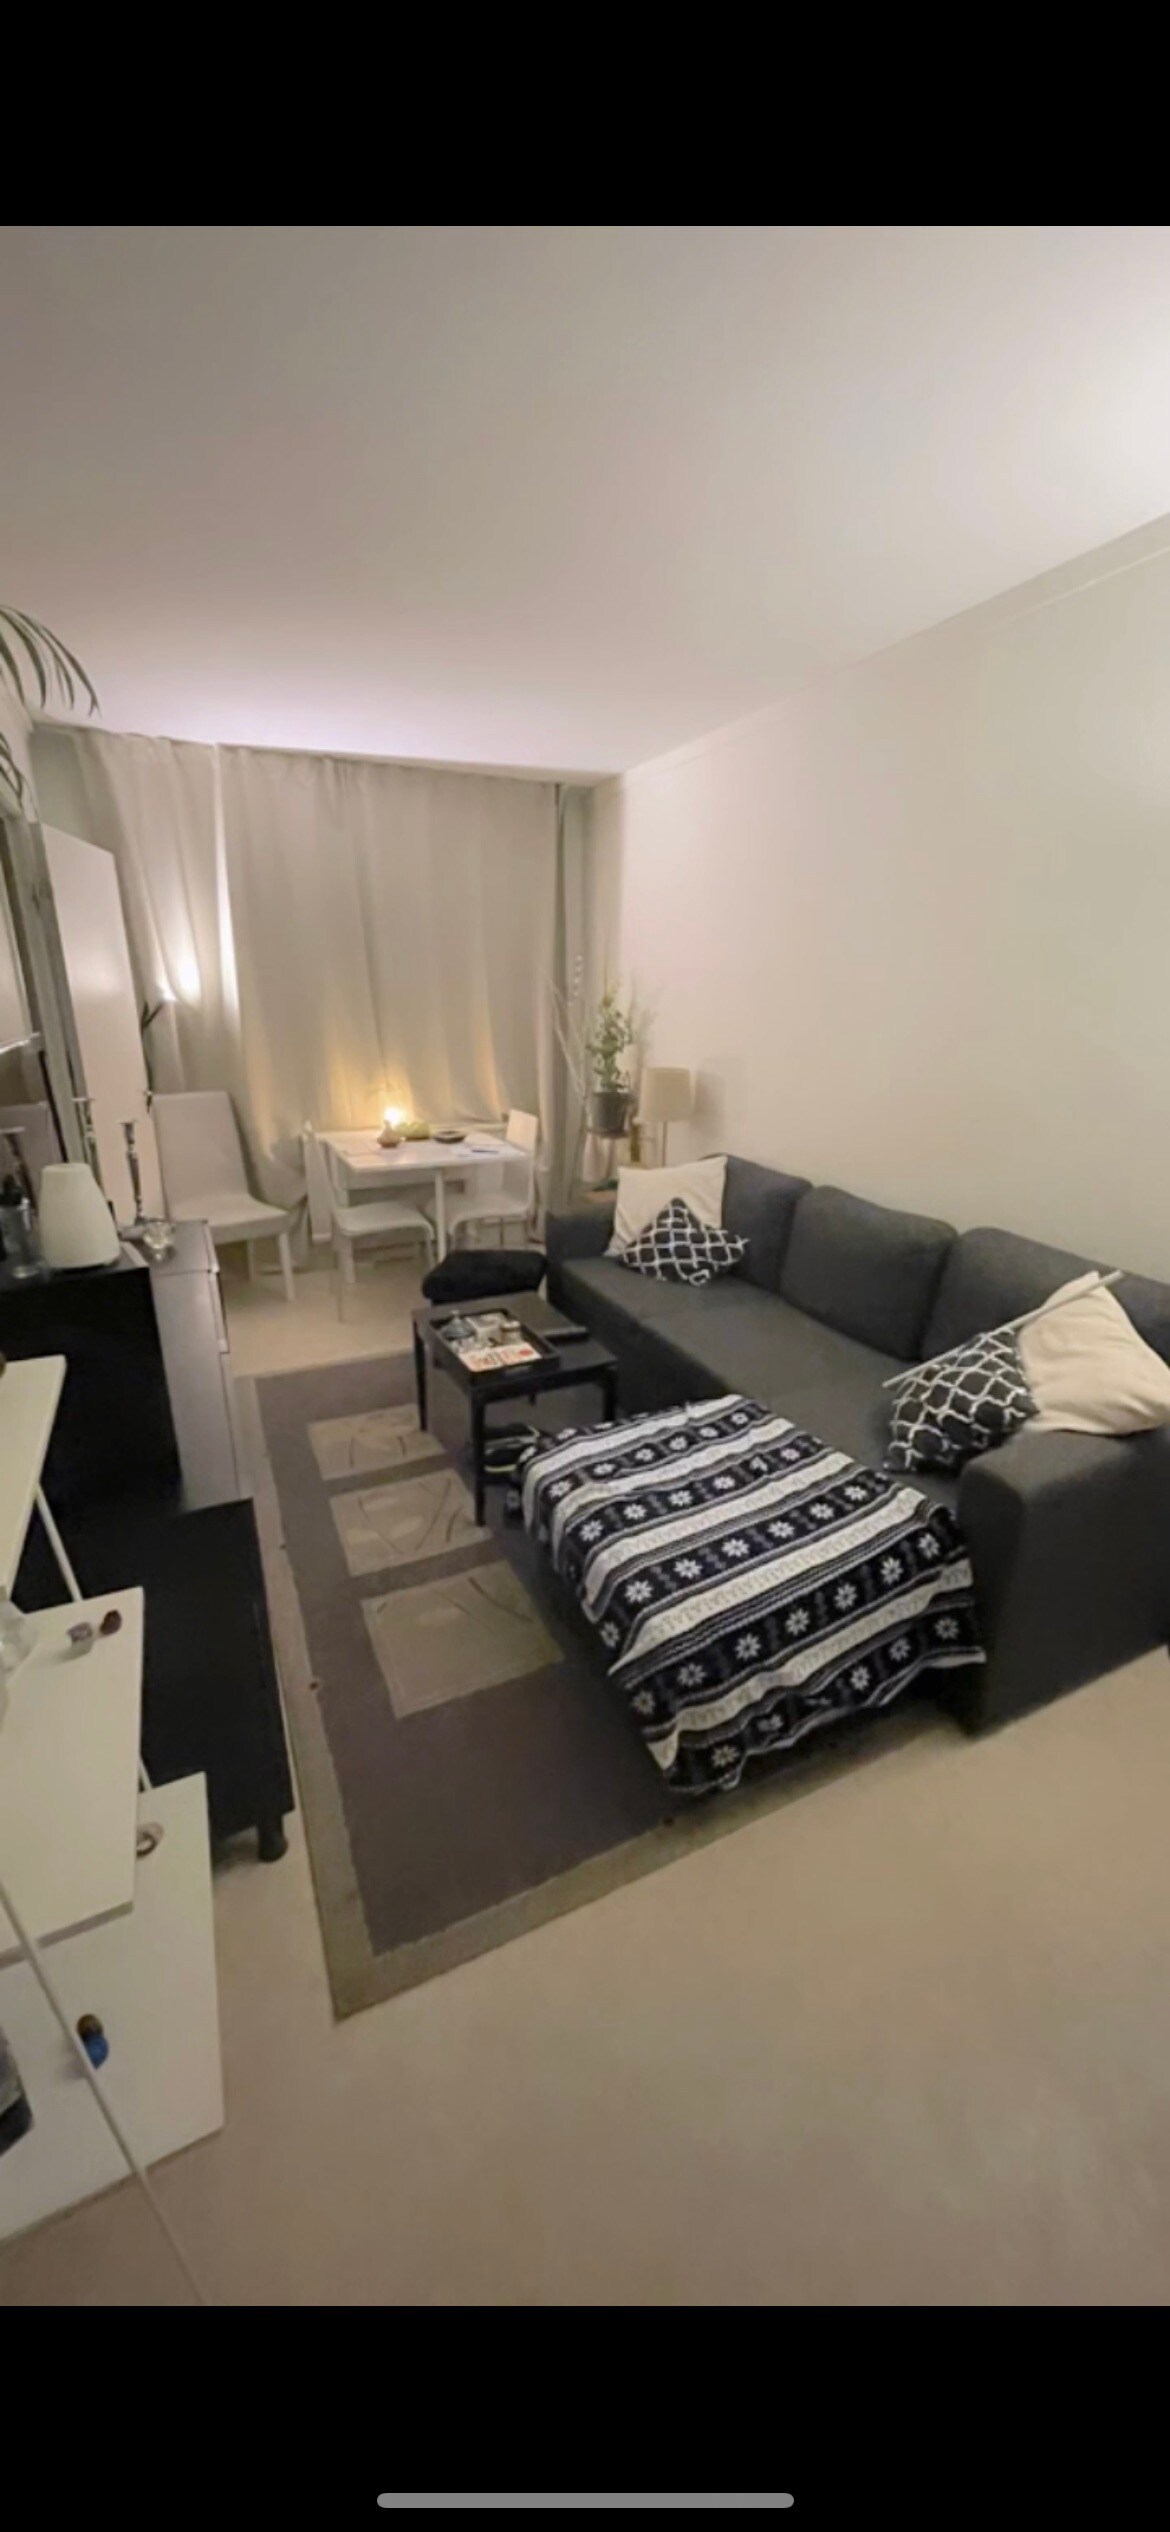 lovely 1 bedroom in Ramberget, 15 min from centre